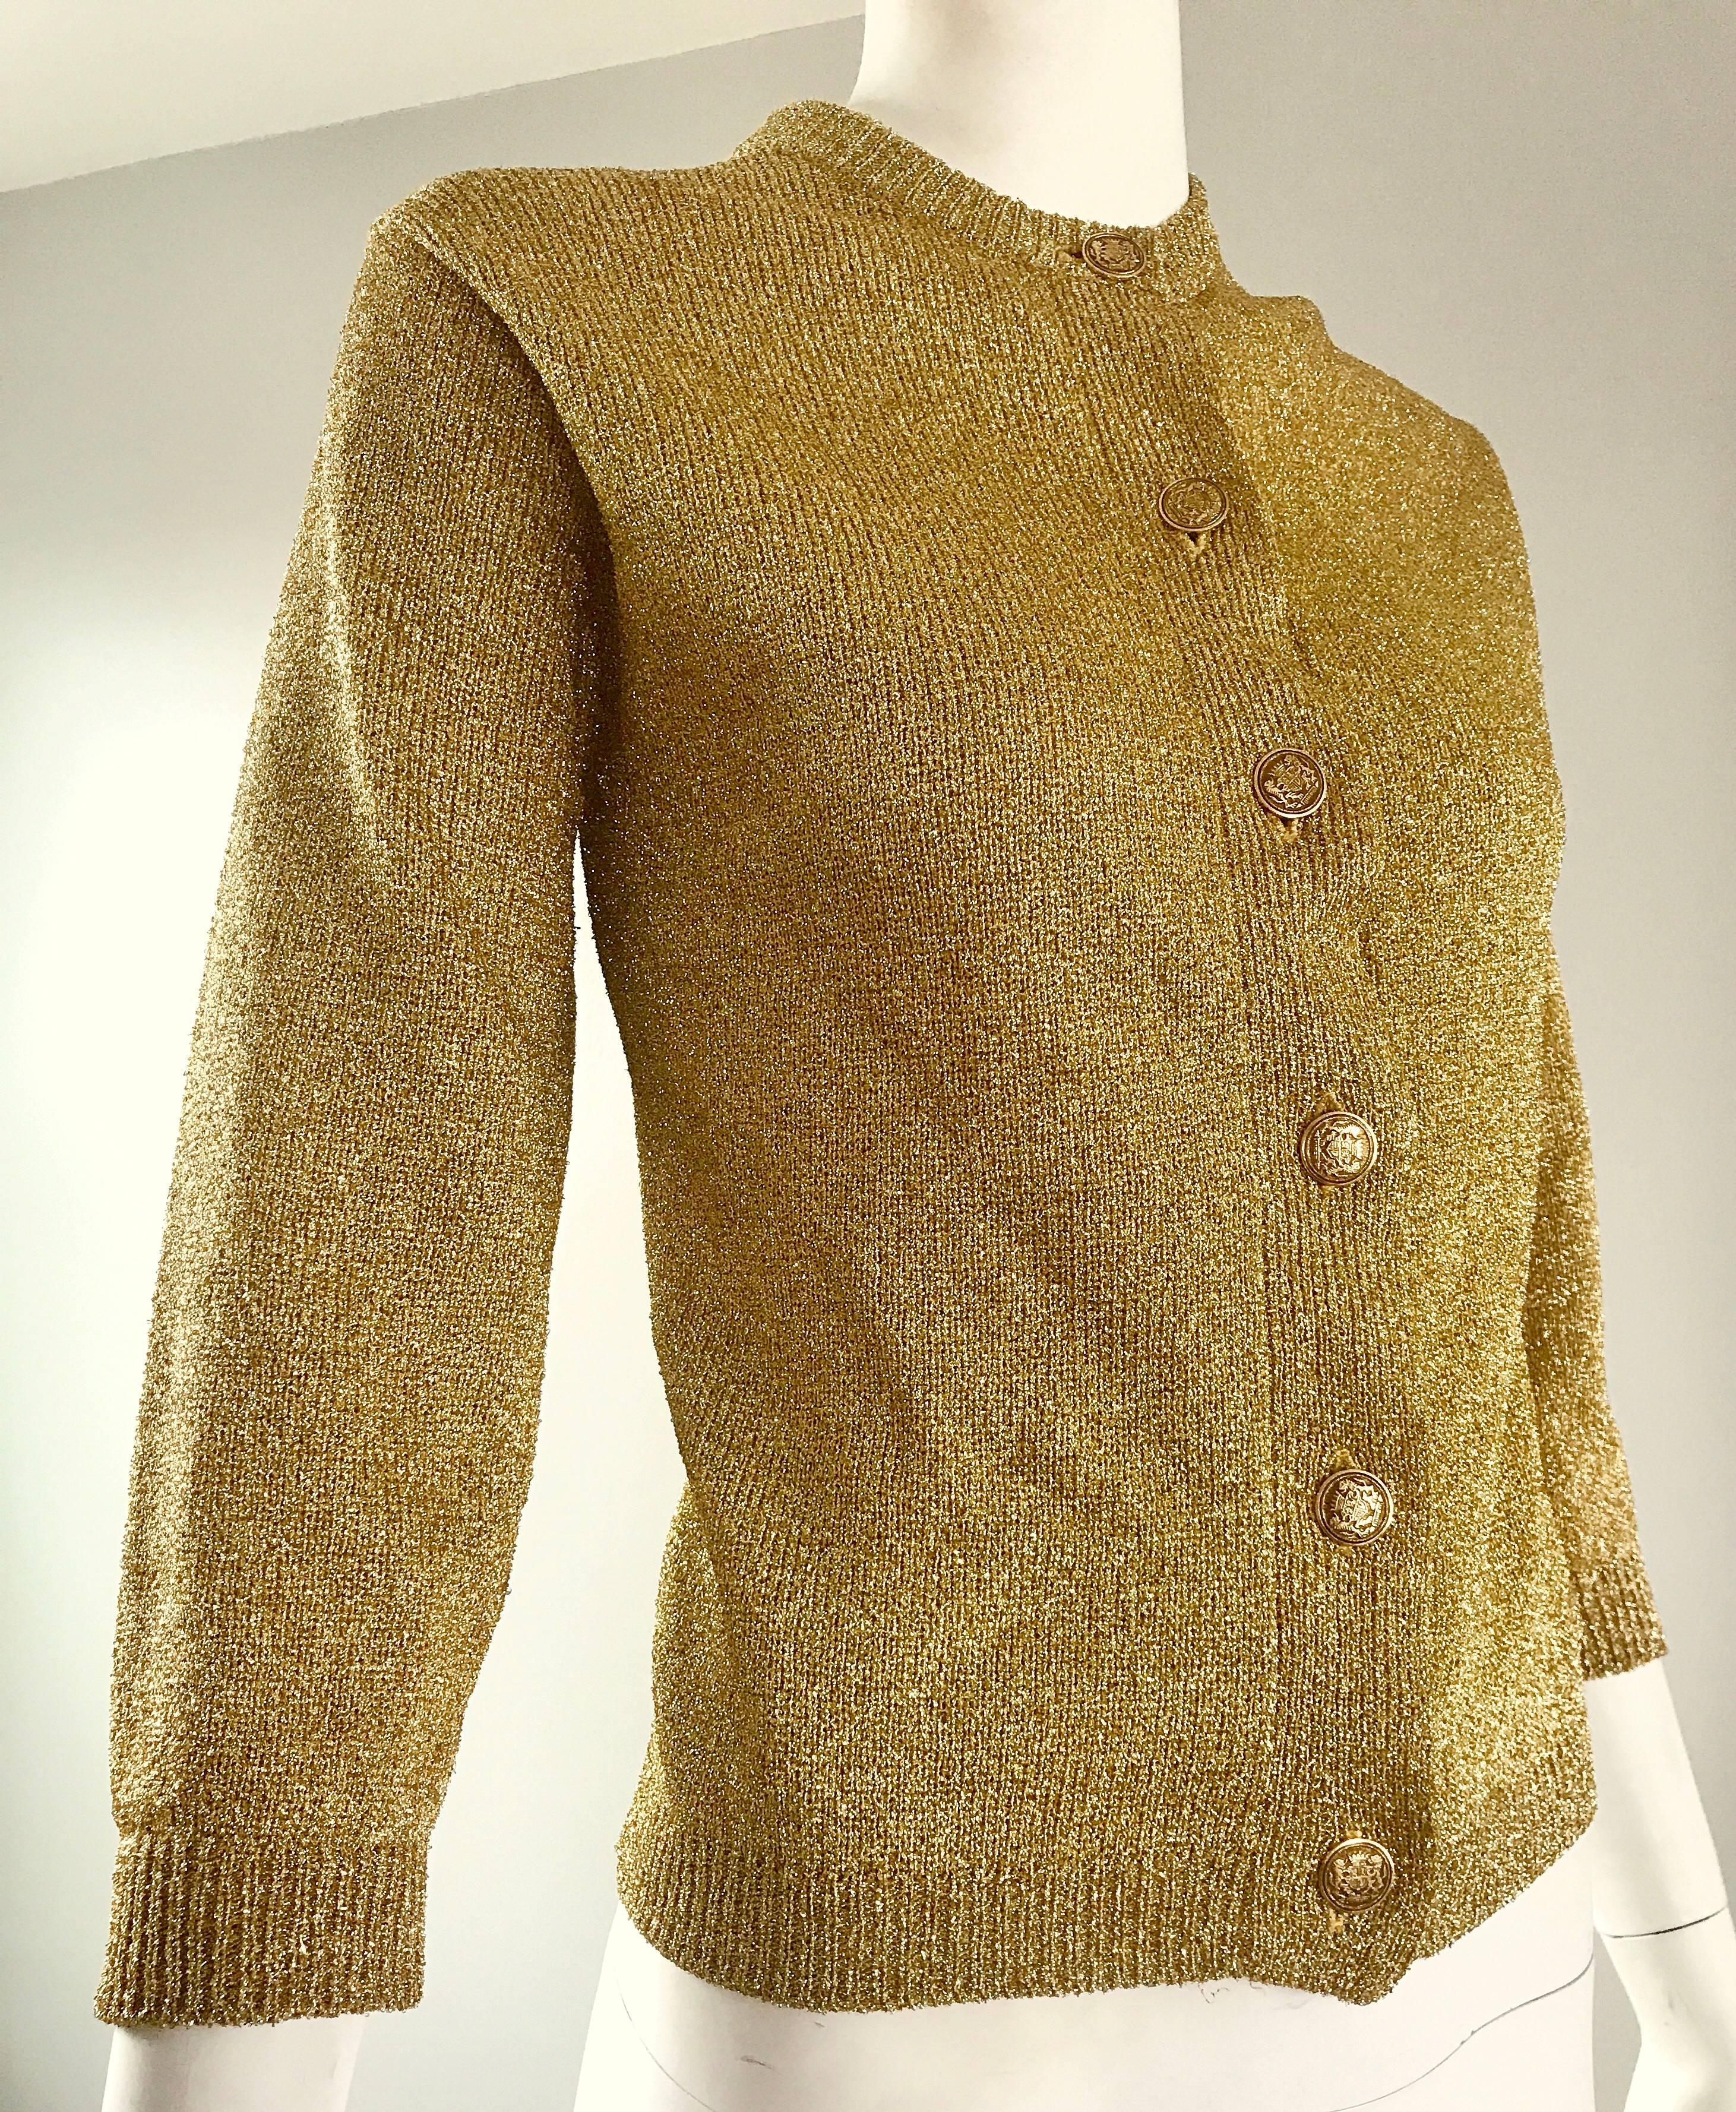 1950s Gold Metallic Lurex 3/4 Sleeves French Made Vintage 50s Cardigan Sweater For Sale 1